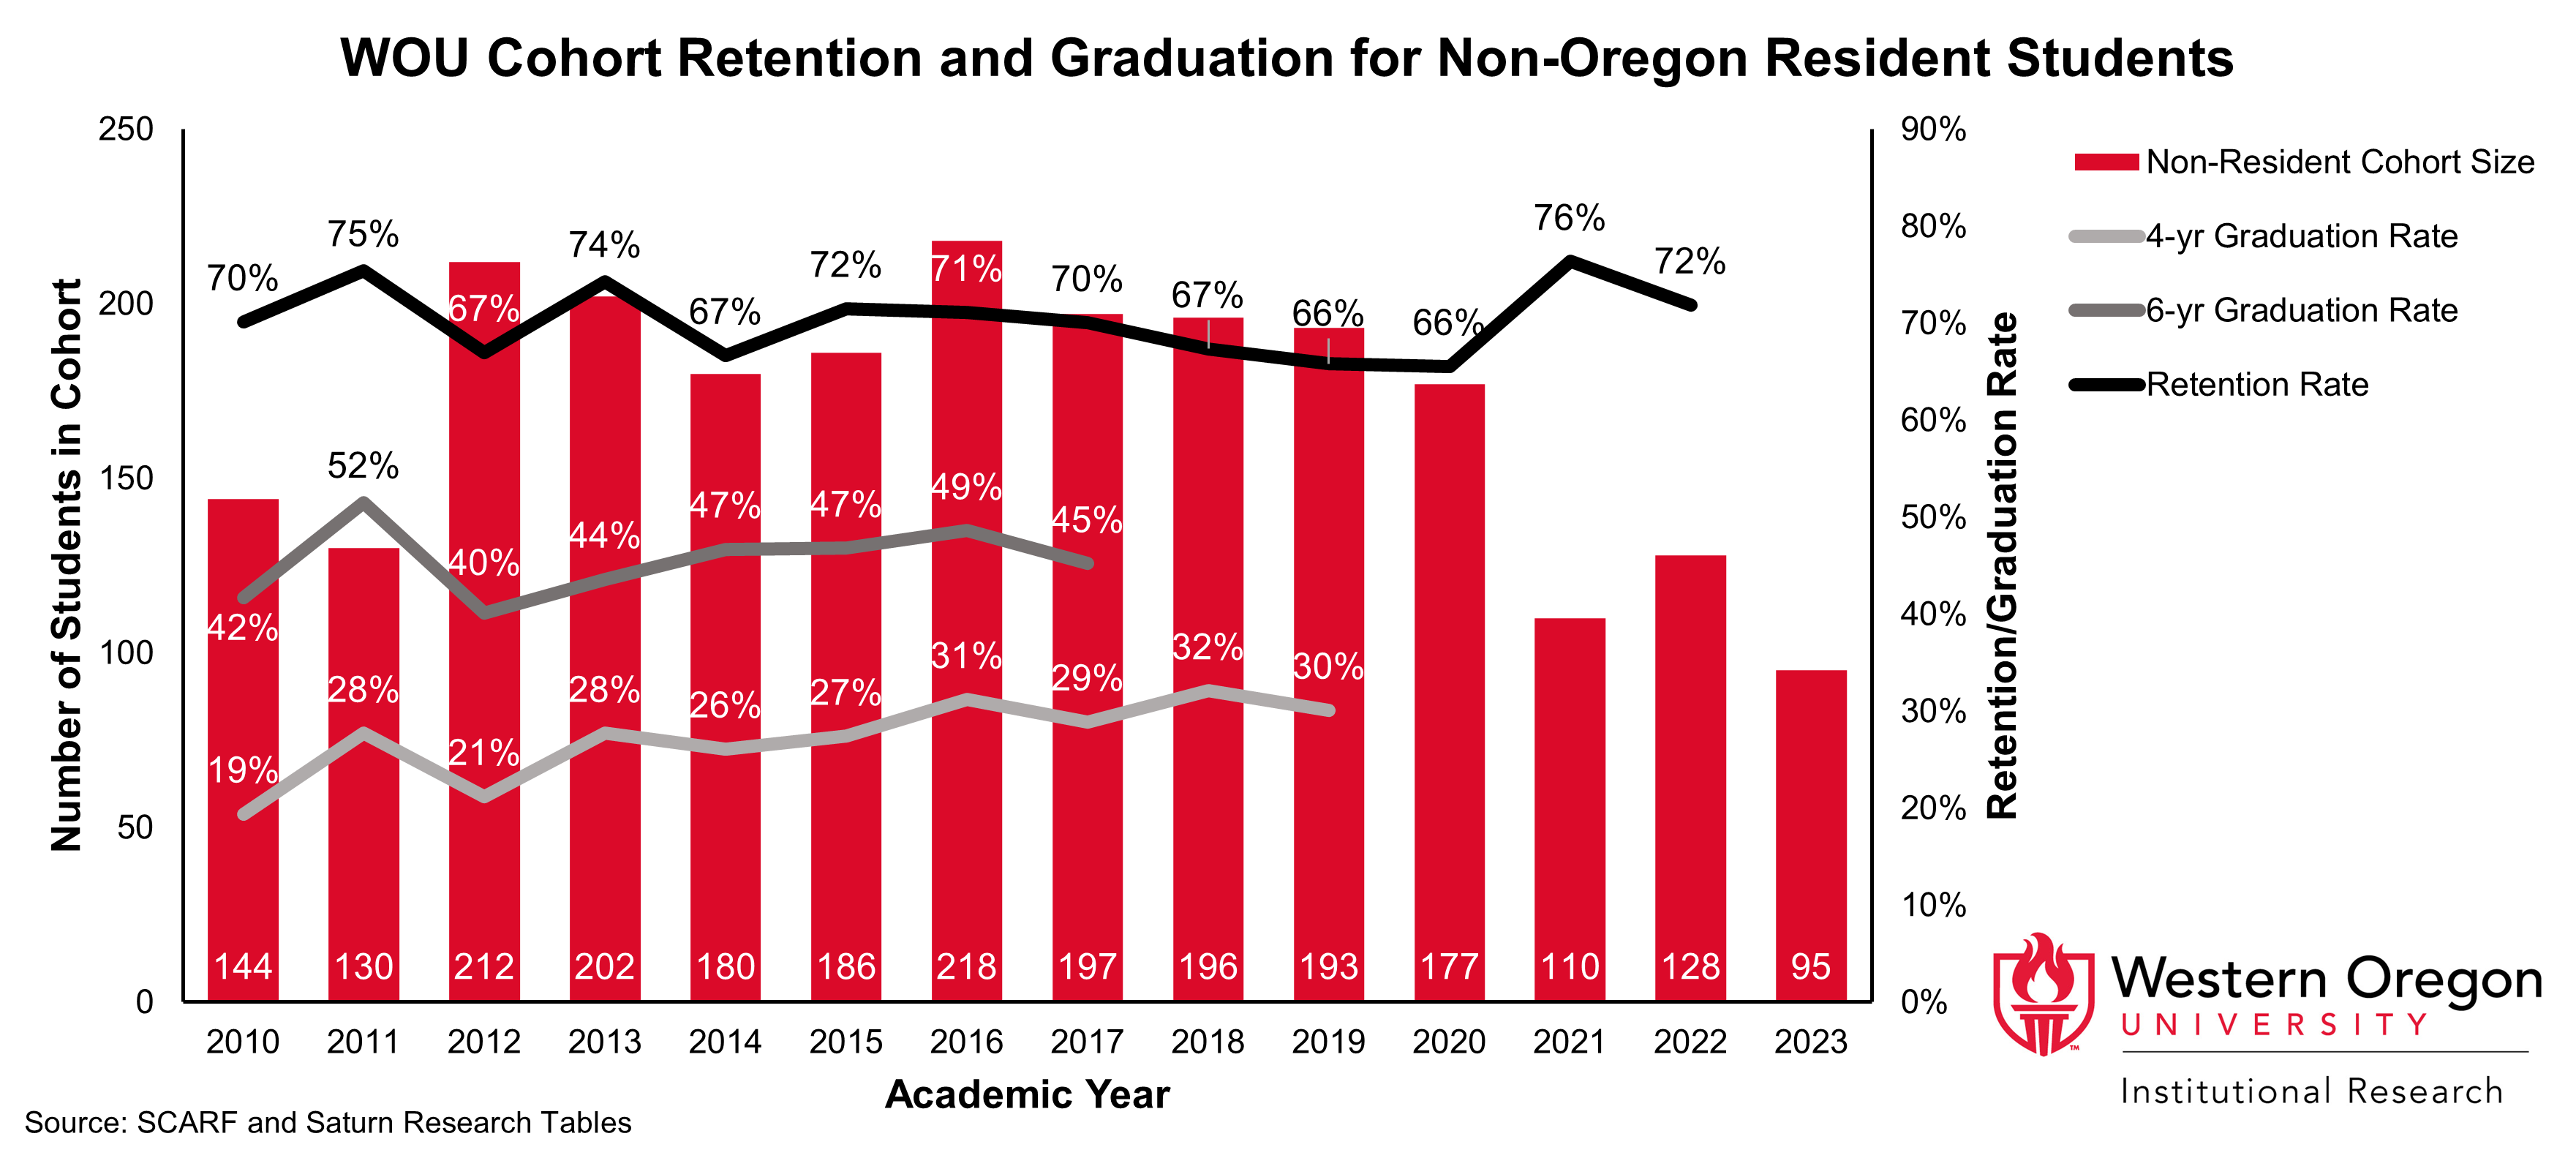 Bar and line graph of retention and 4- and 6-year graduation rates since 2010 for WOU students that have non-residency status, showing that graduation and retention rates have increased overall.